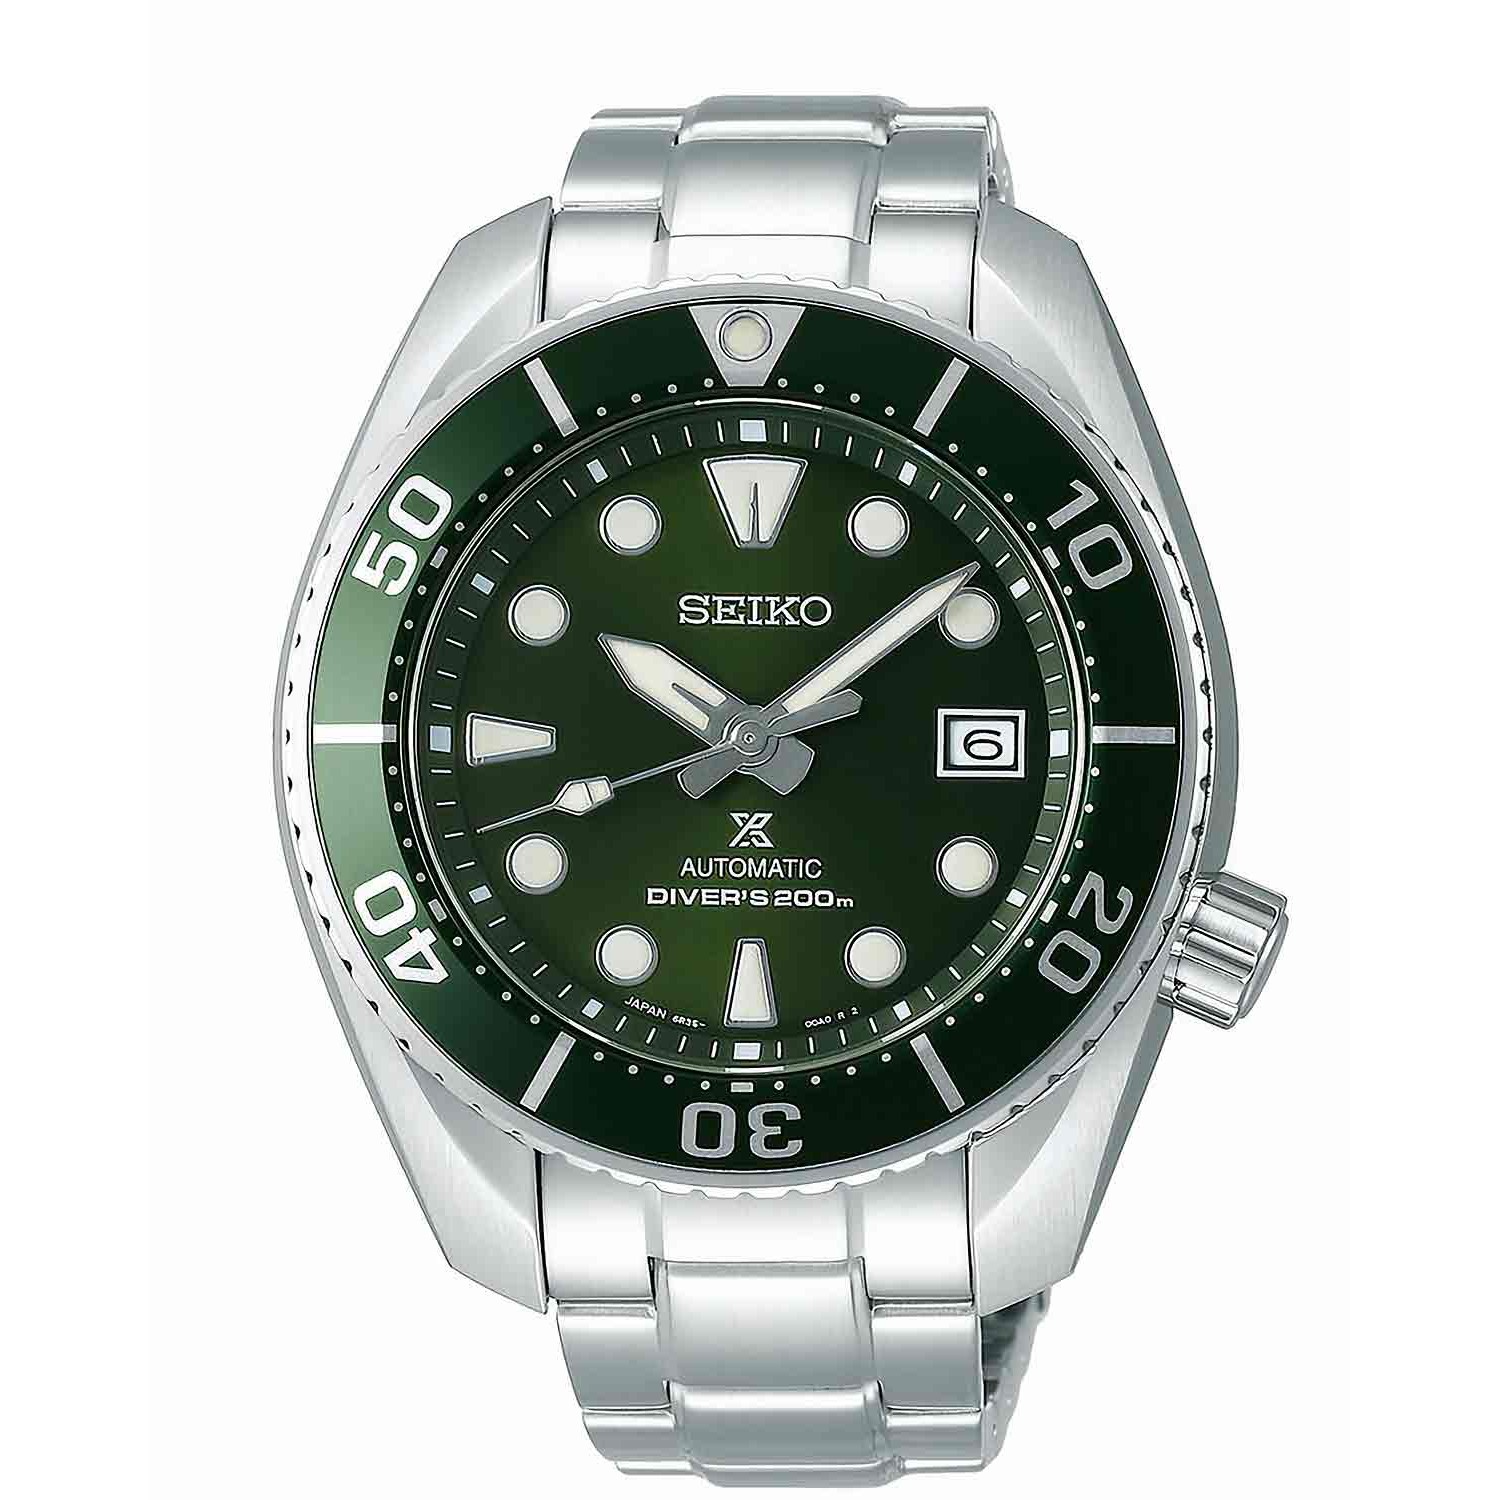 SPB103J  SEIKO Prospex Sumo Prospex  Special Edition. The Seiko SPB103J Prospex Sumo is an automatic movement watch with 200m water resistance. The SPB103J features a classic looking watch with an emerald green case and dial along with a stainless steel c